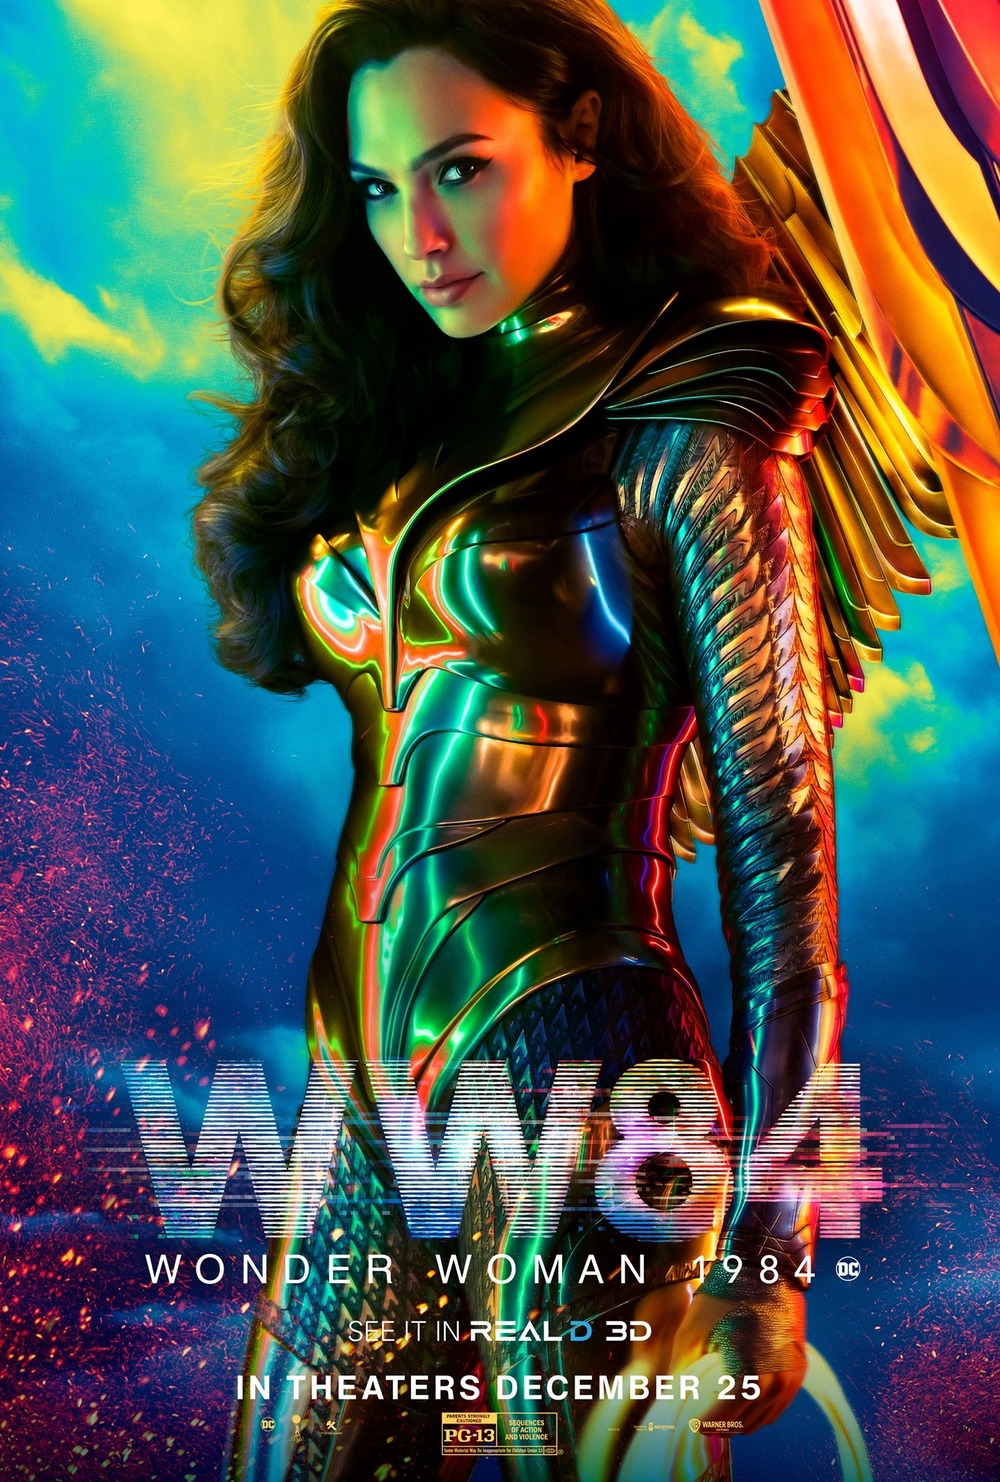 Wonder Woman 1984 - Movie info and showtimes in Trinidad 